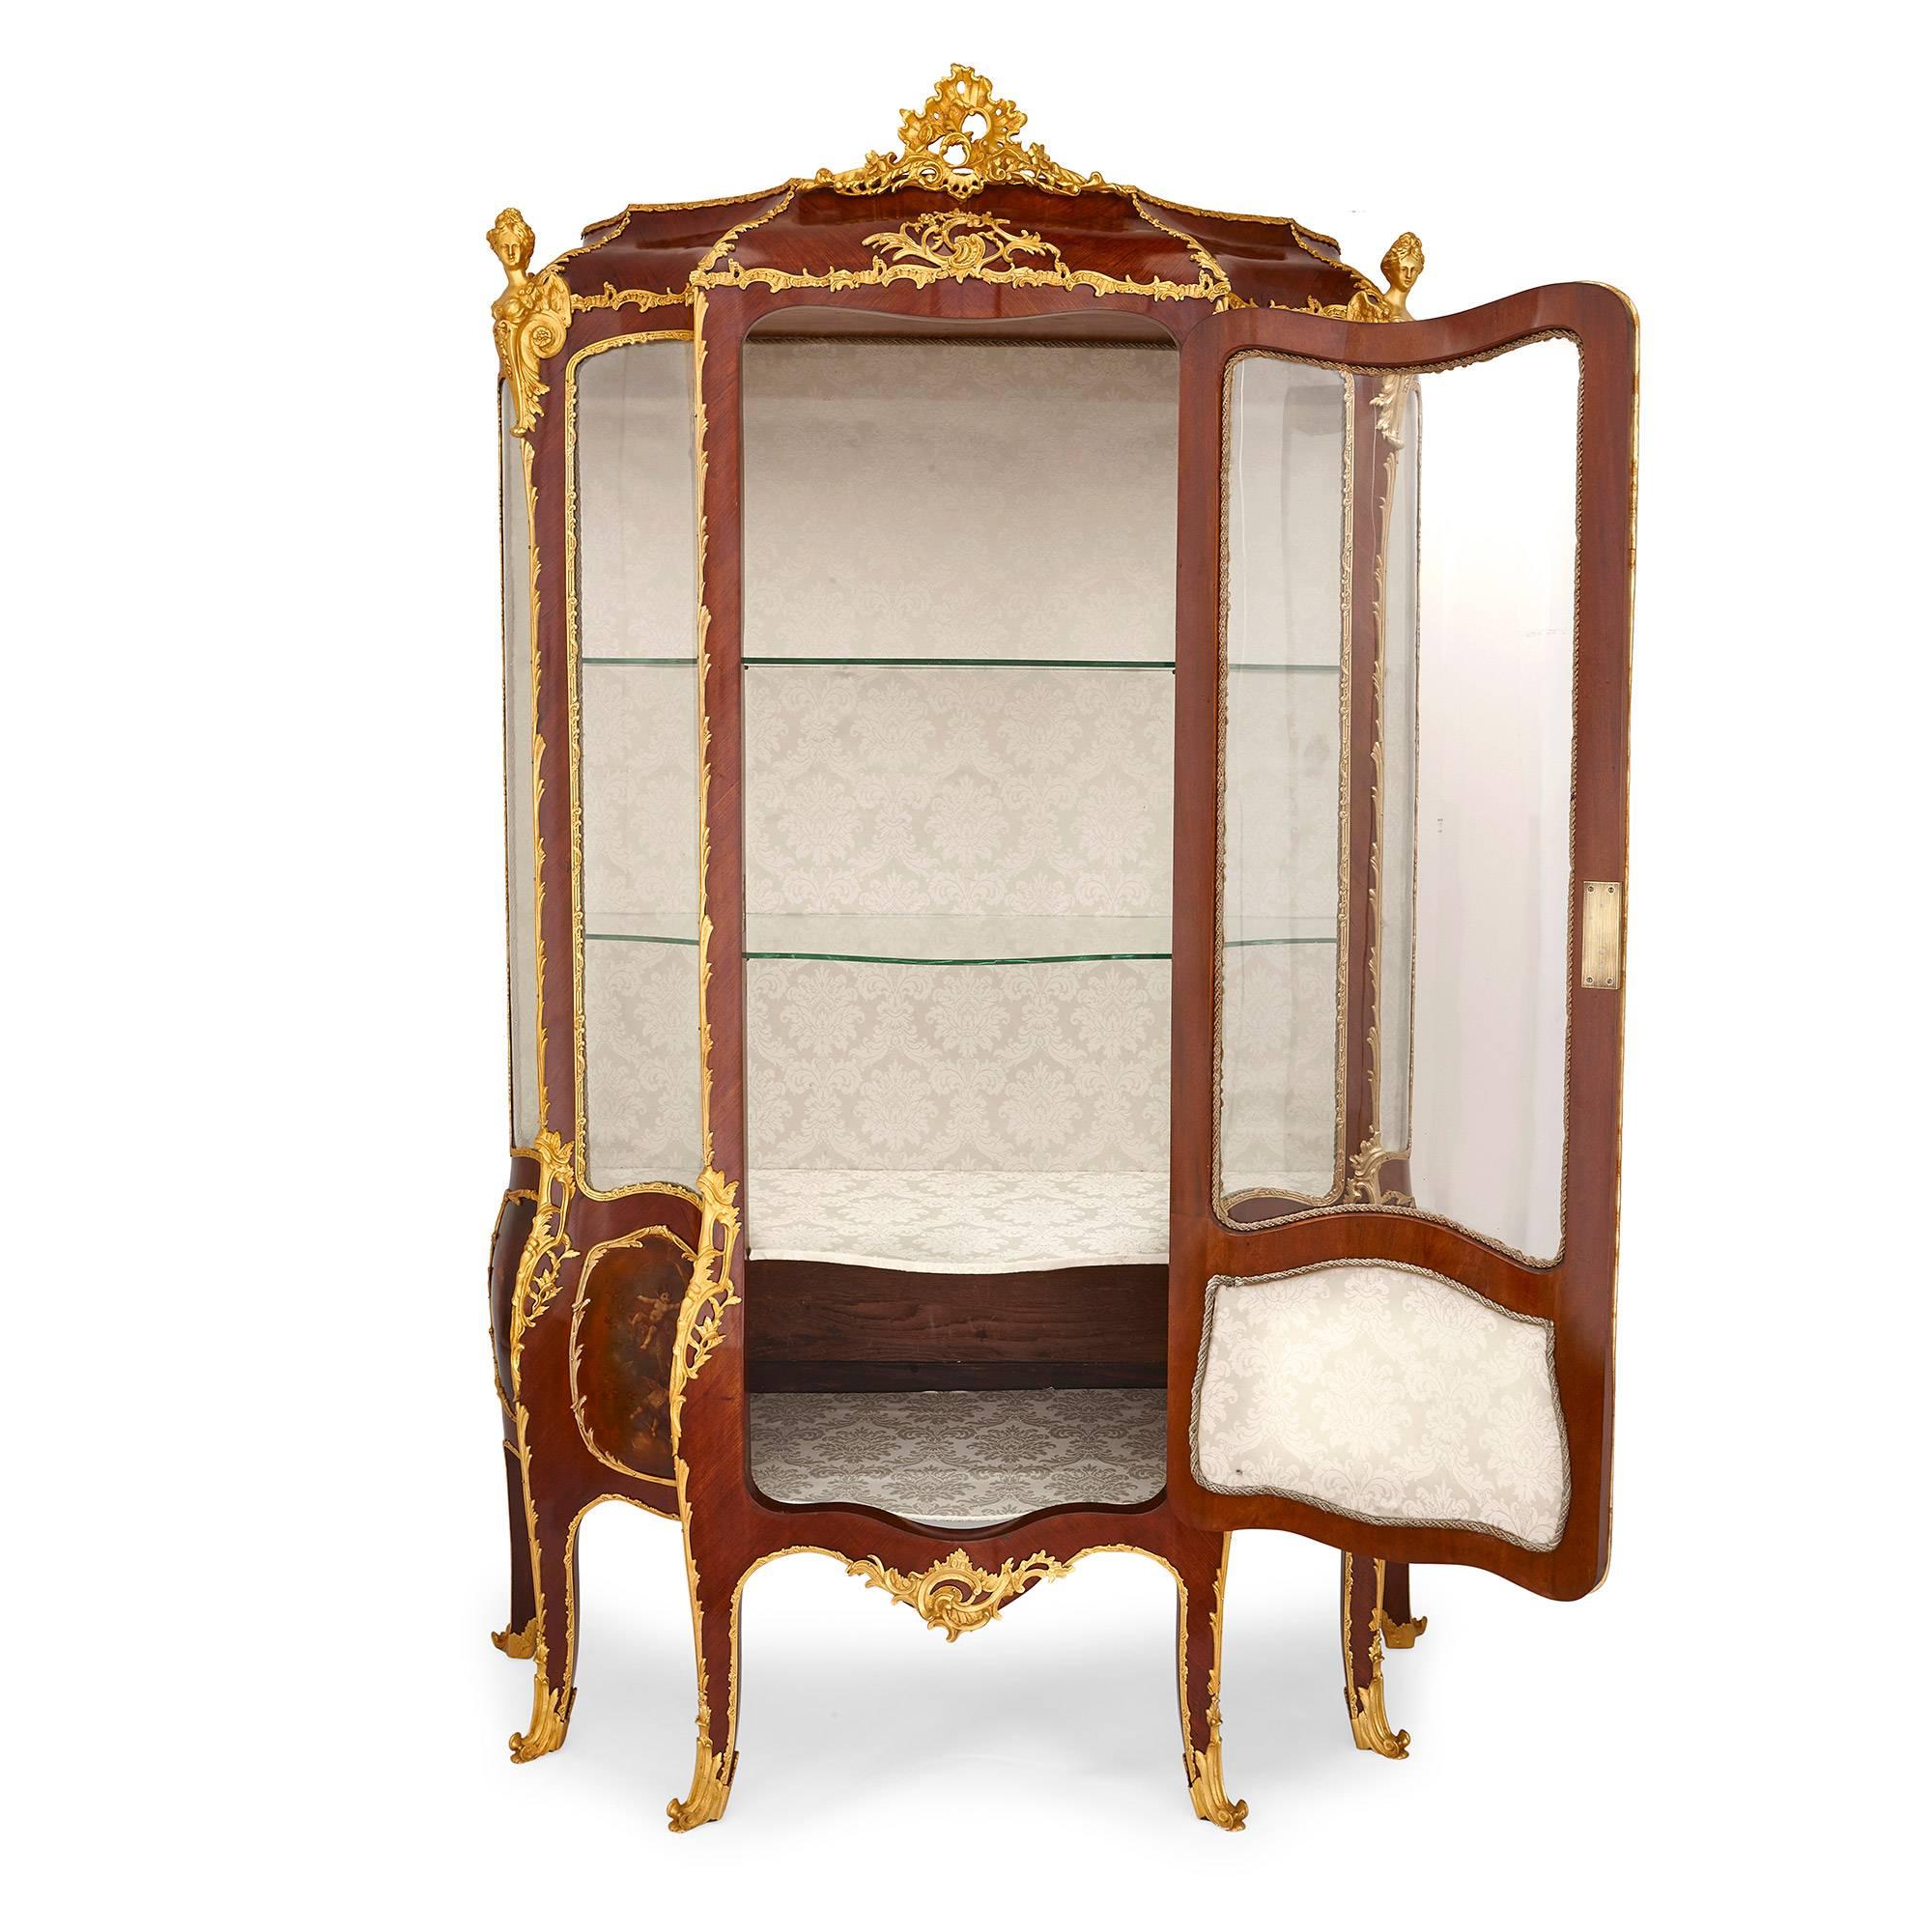 This exquisite French display cabinet is crafted from mahogany and features lustrous Vernis Martin lacquer decorations. The shape of the vitrine is striking: crafted in five vertical panels which undulate between convex and concave, it references a